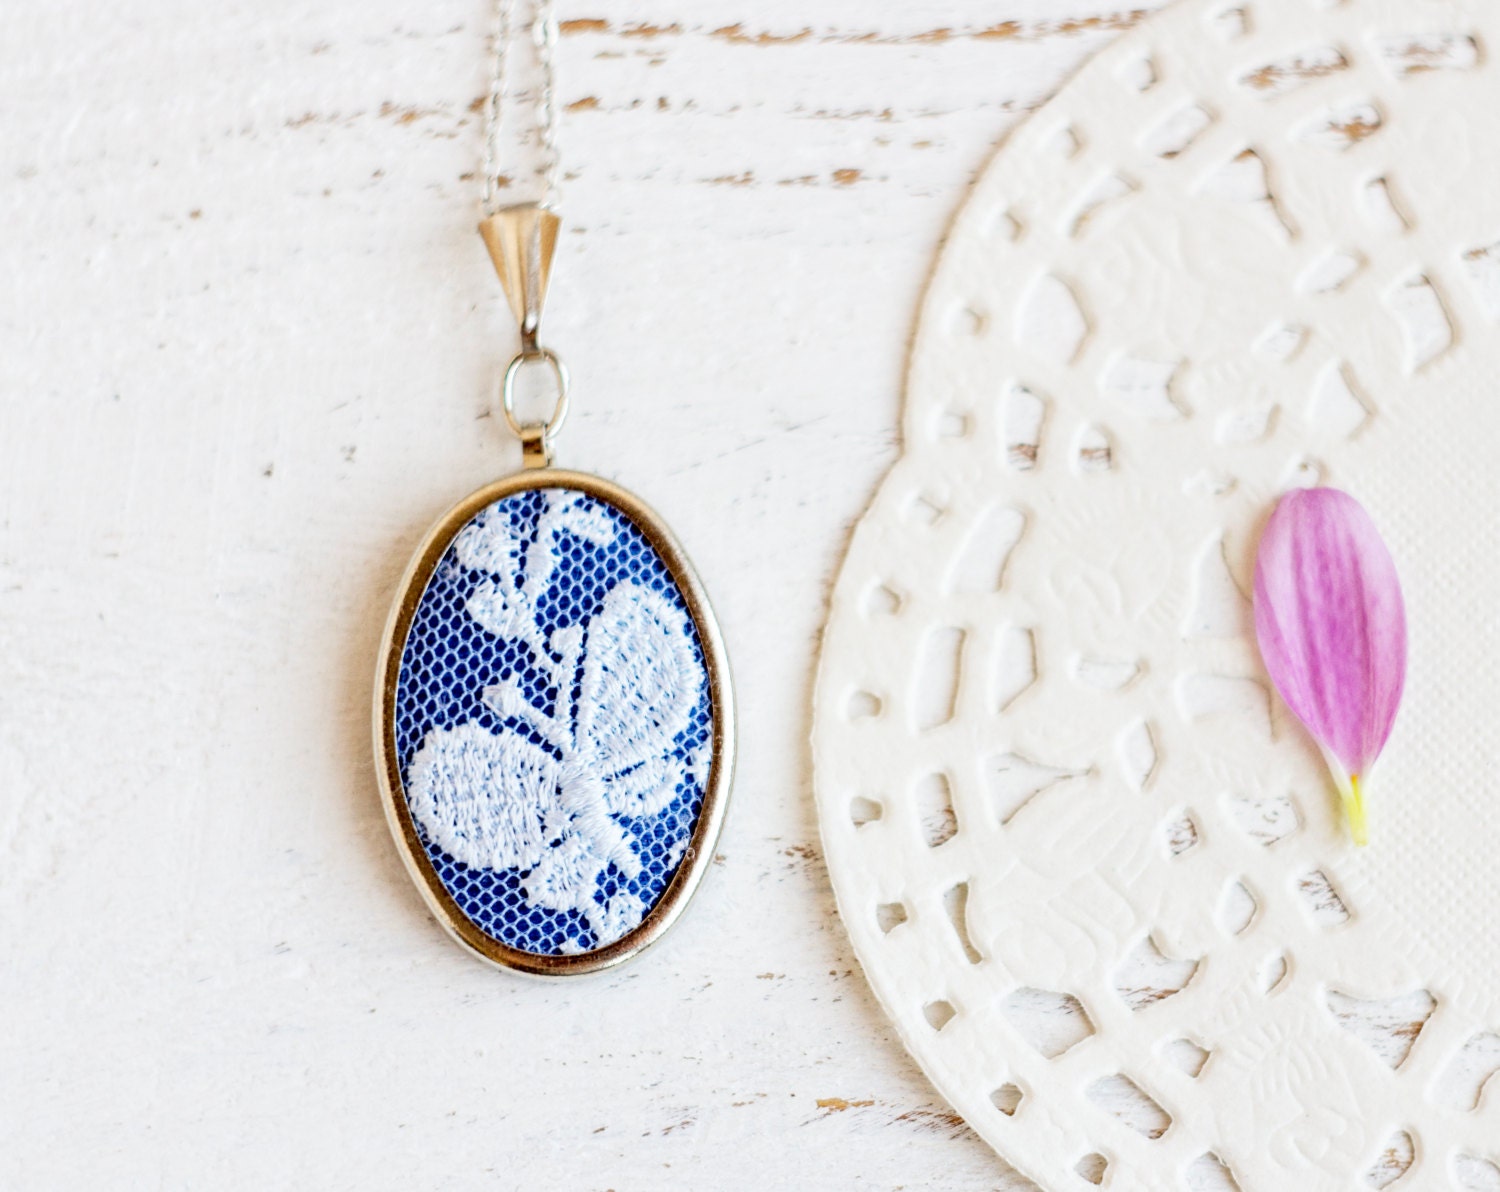 Textile necklace with blue floral / butterfly lace and blue fabric - bridesmaid jewelry, Mother's day gift - skrynka